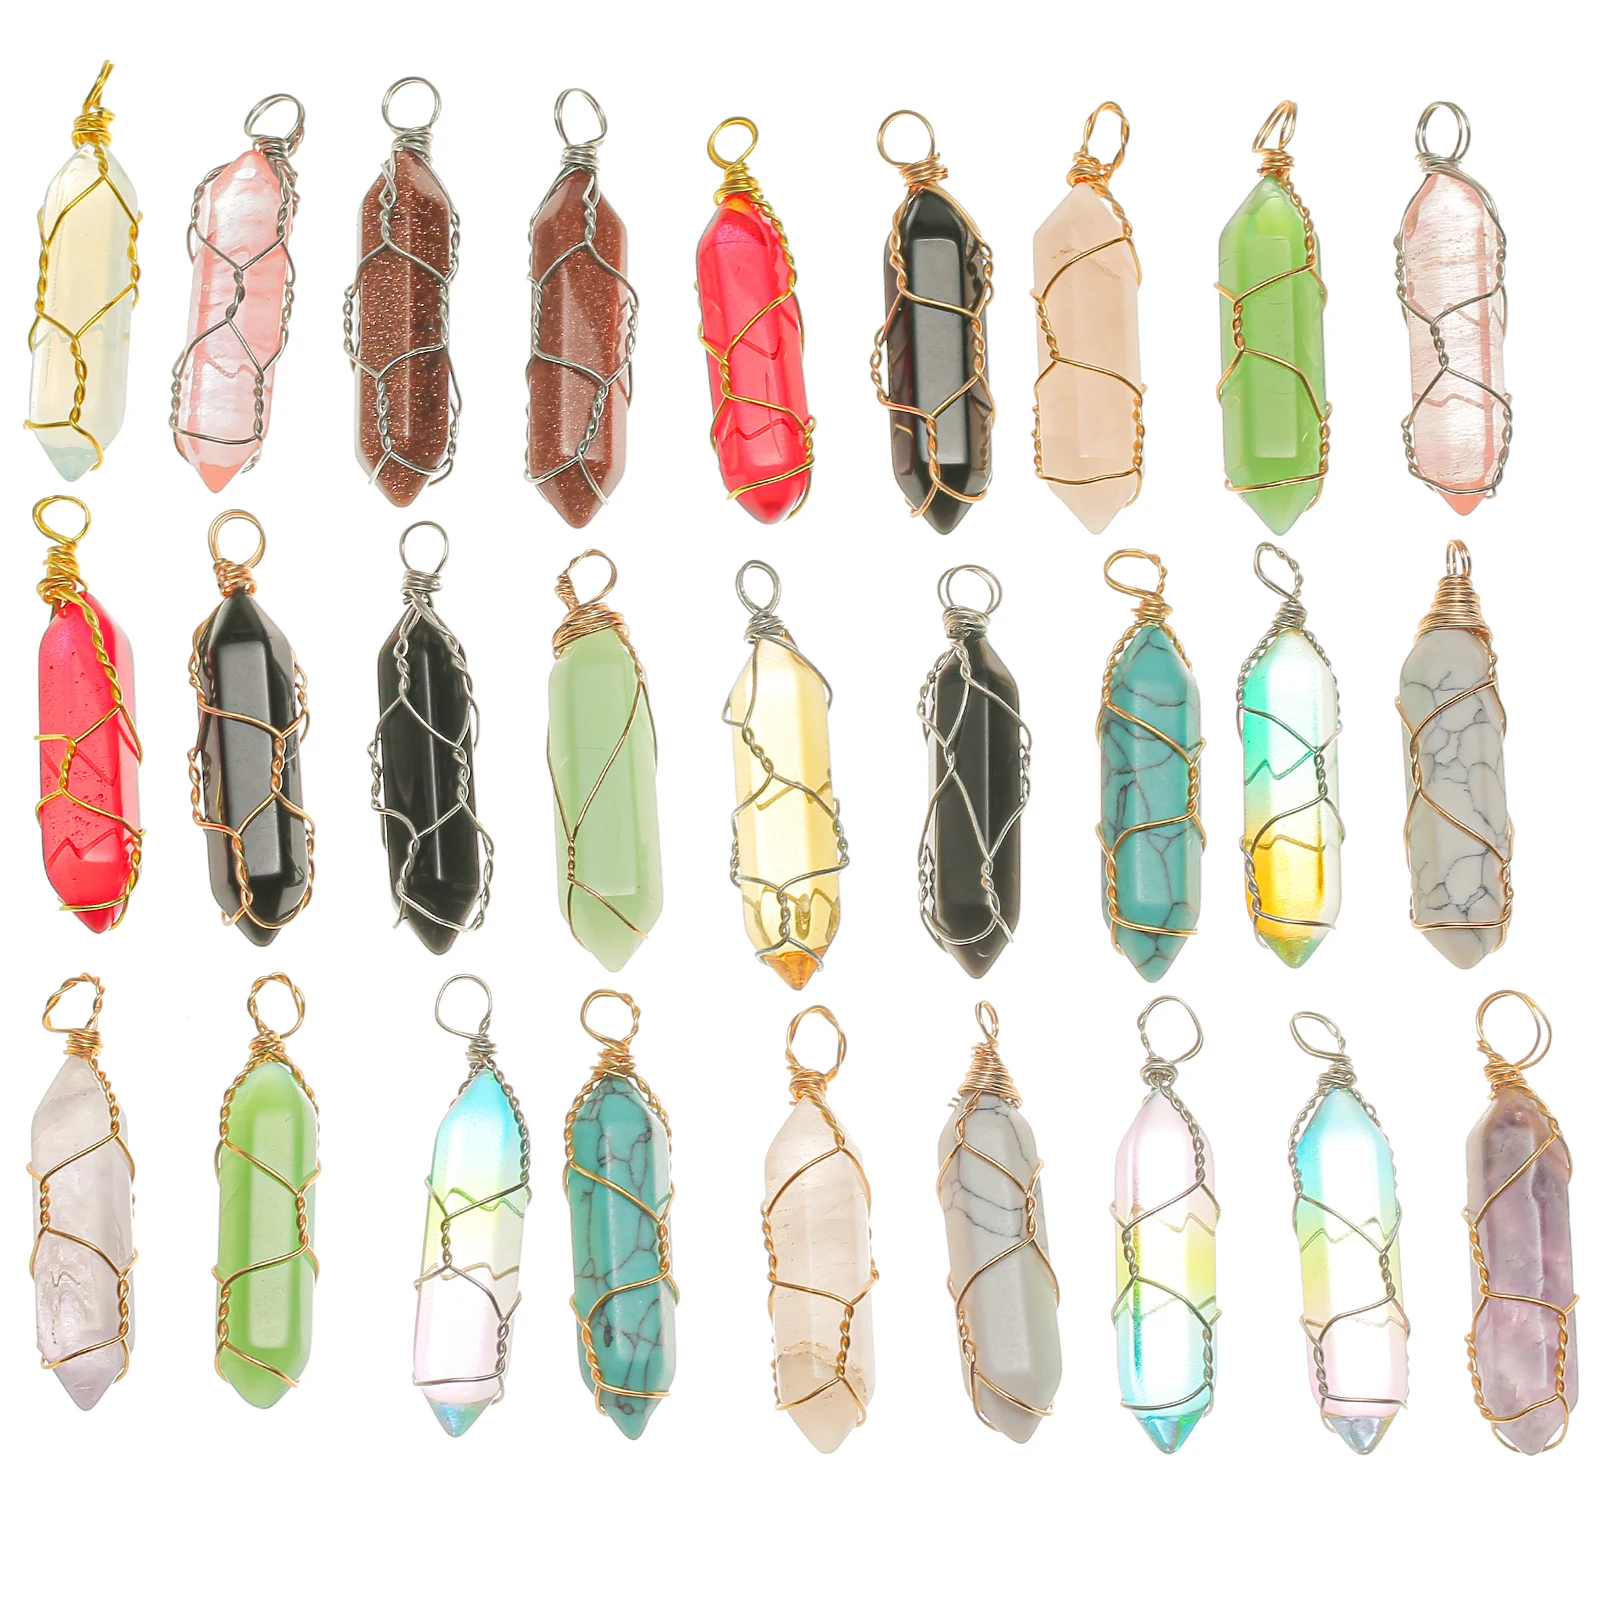 

New Healing Crystal Wire Wrap Terminated Pointed Hexagon Stone Pendants for jewelry making DIY necklace Amethyst charms, Customers' request